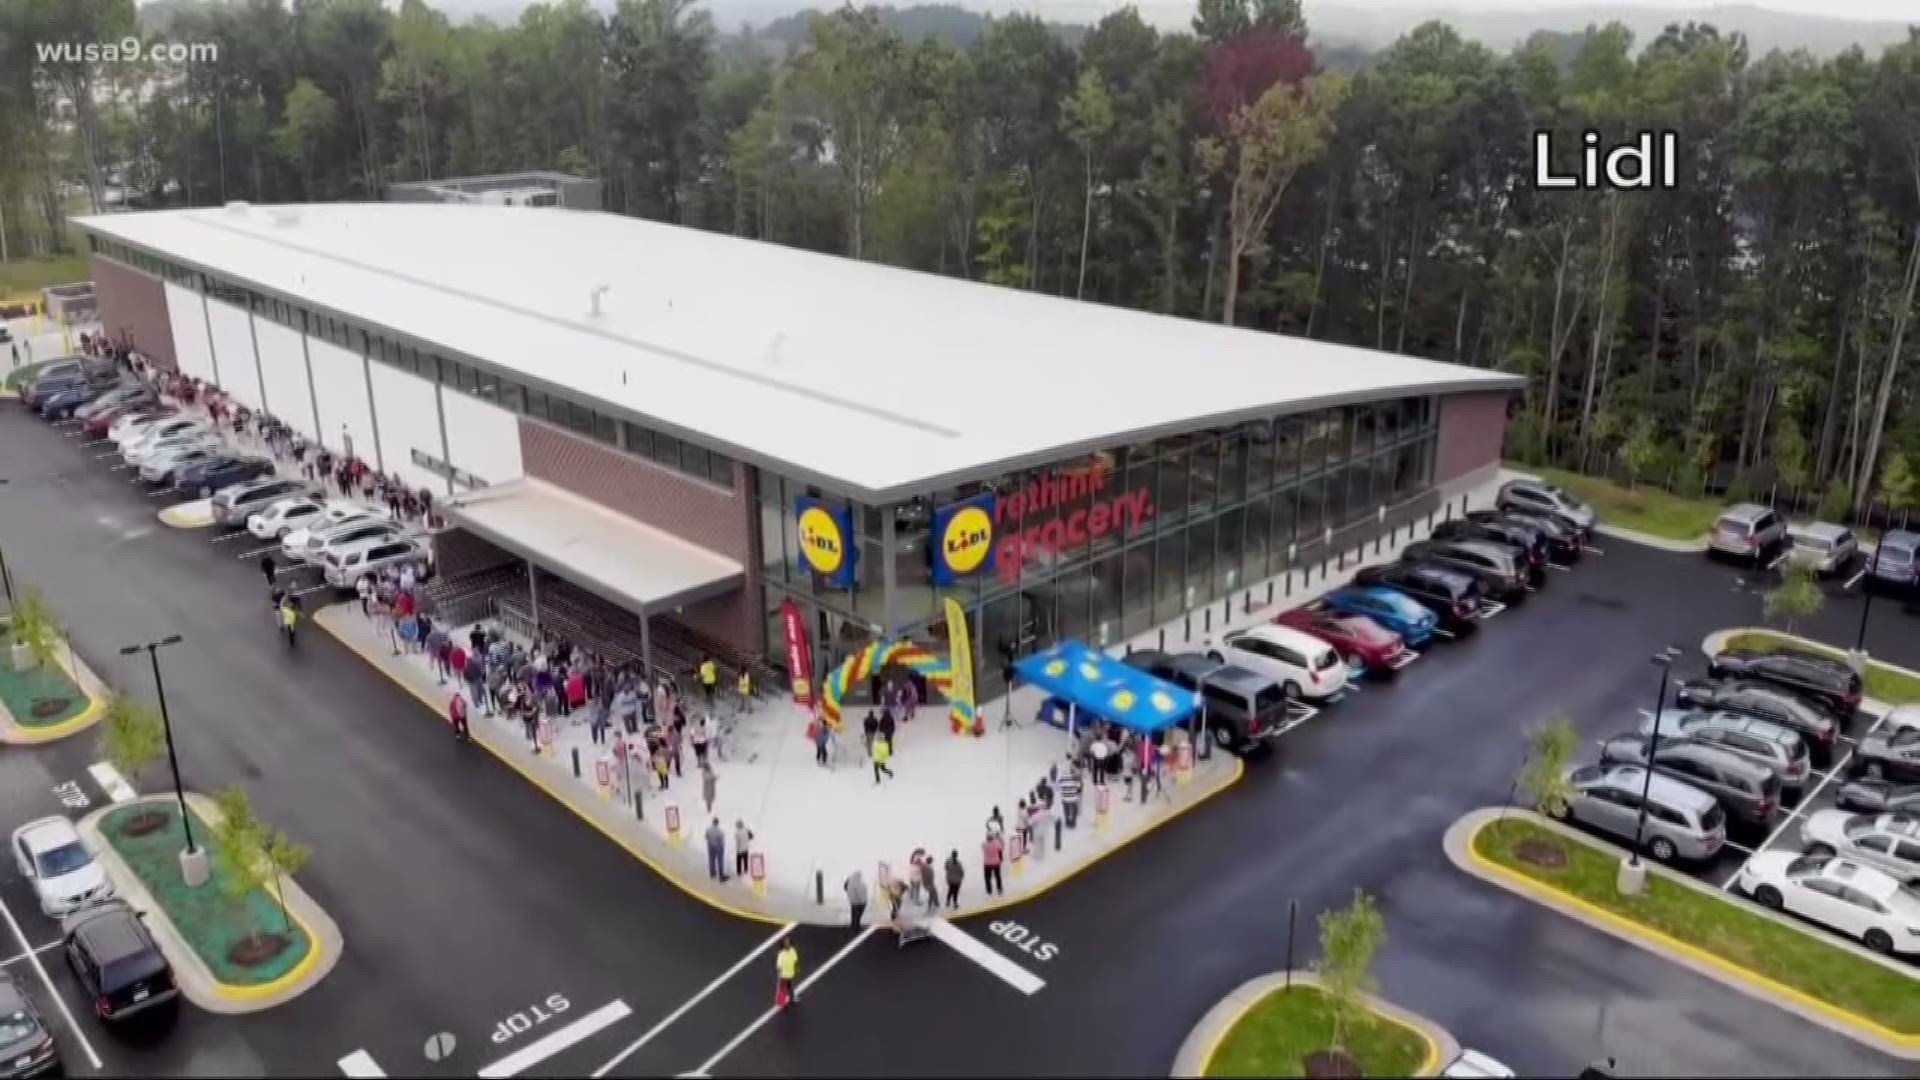 So what's it like to shop at Lidl? There are a handful of stores already open in Maryland and Virginia.
We sent our Bruce Leshan to check out the one it Bowie.